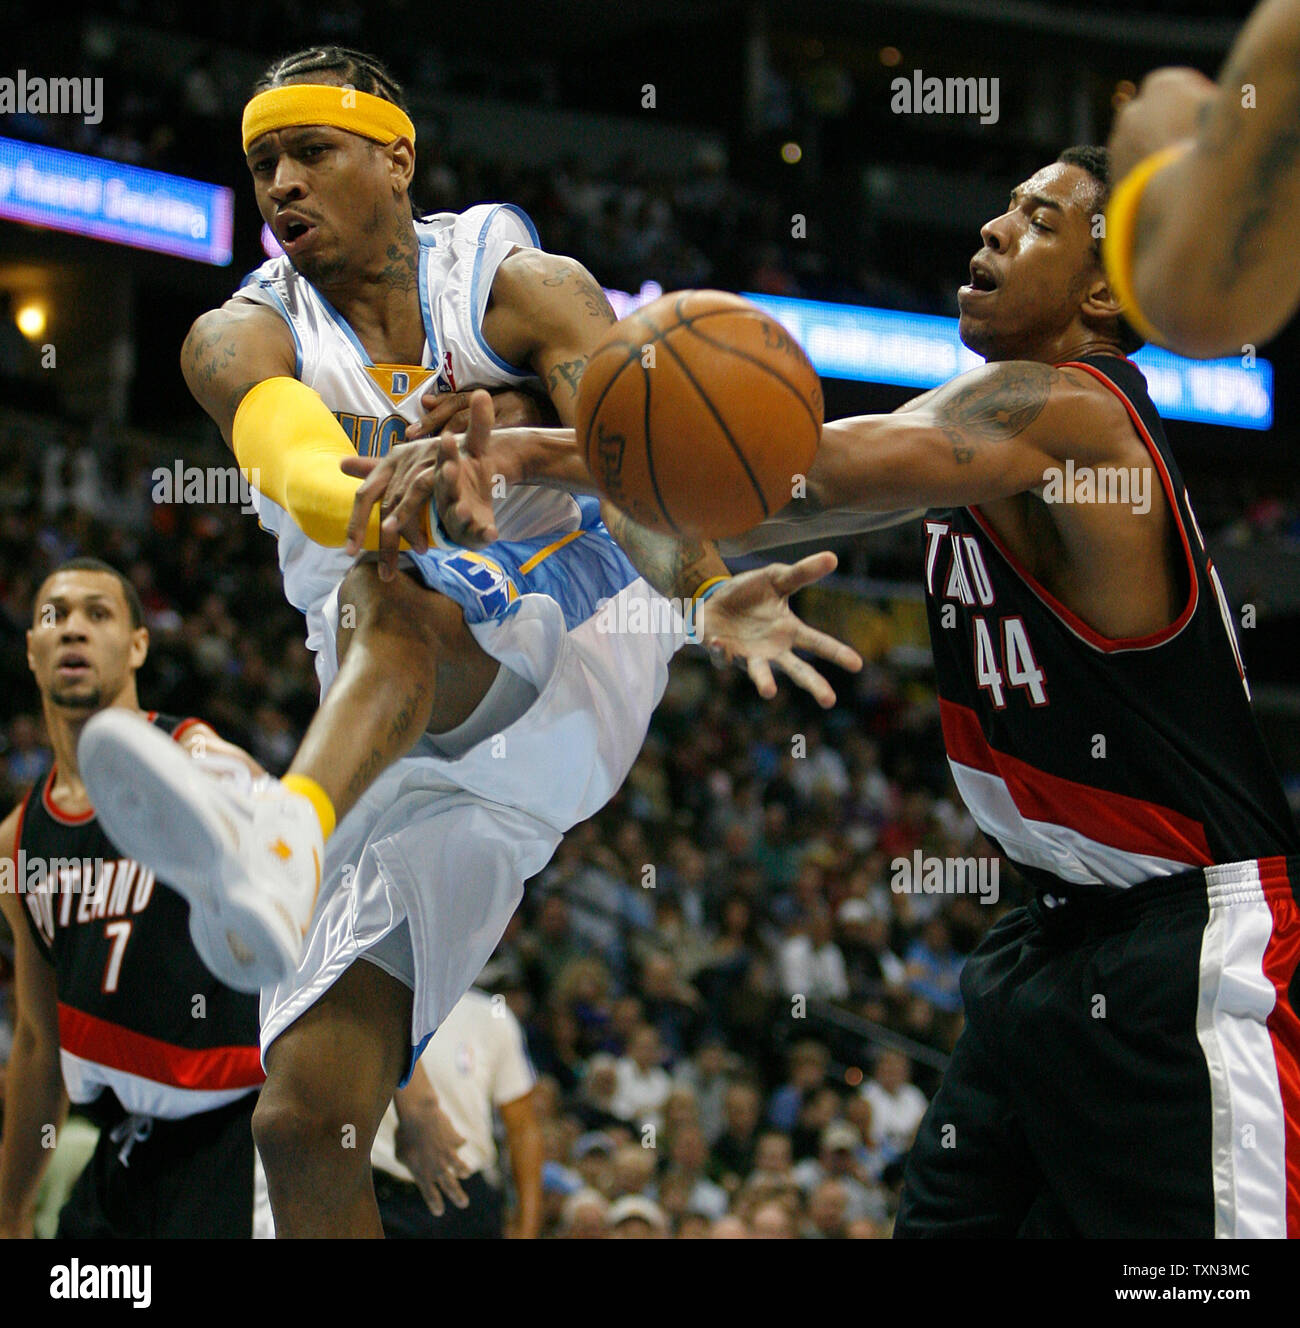 Portland Trail Blazers forward Channing Frye (R) fouls Denver Nuggets guard Allen Iverson on a drive to the basket during the first quarter at the Pepsi Center in Denver on December 16, 2007.   (UPI Photo/Gary C. Caskey) Stock Photo